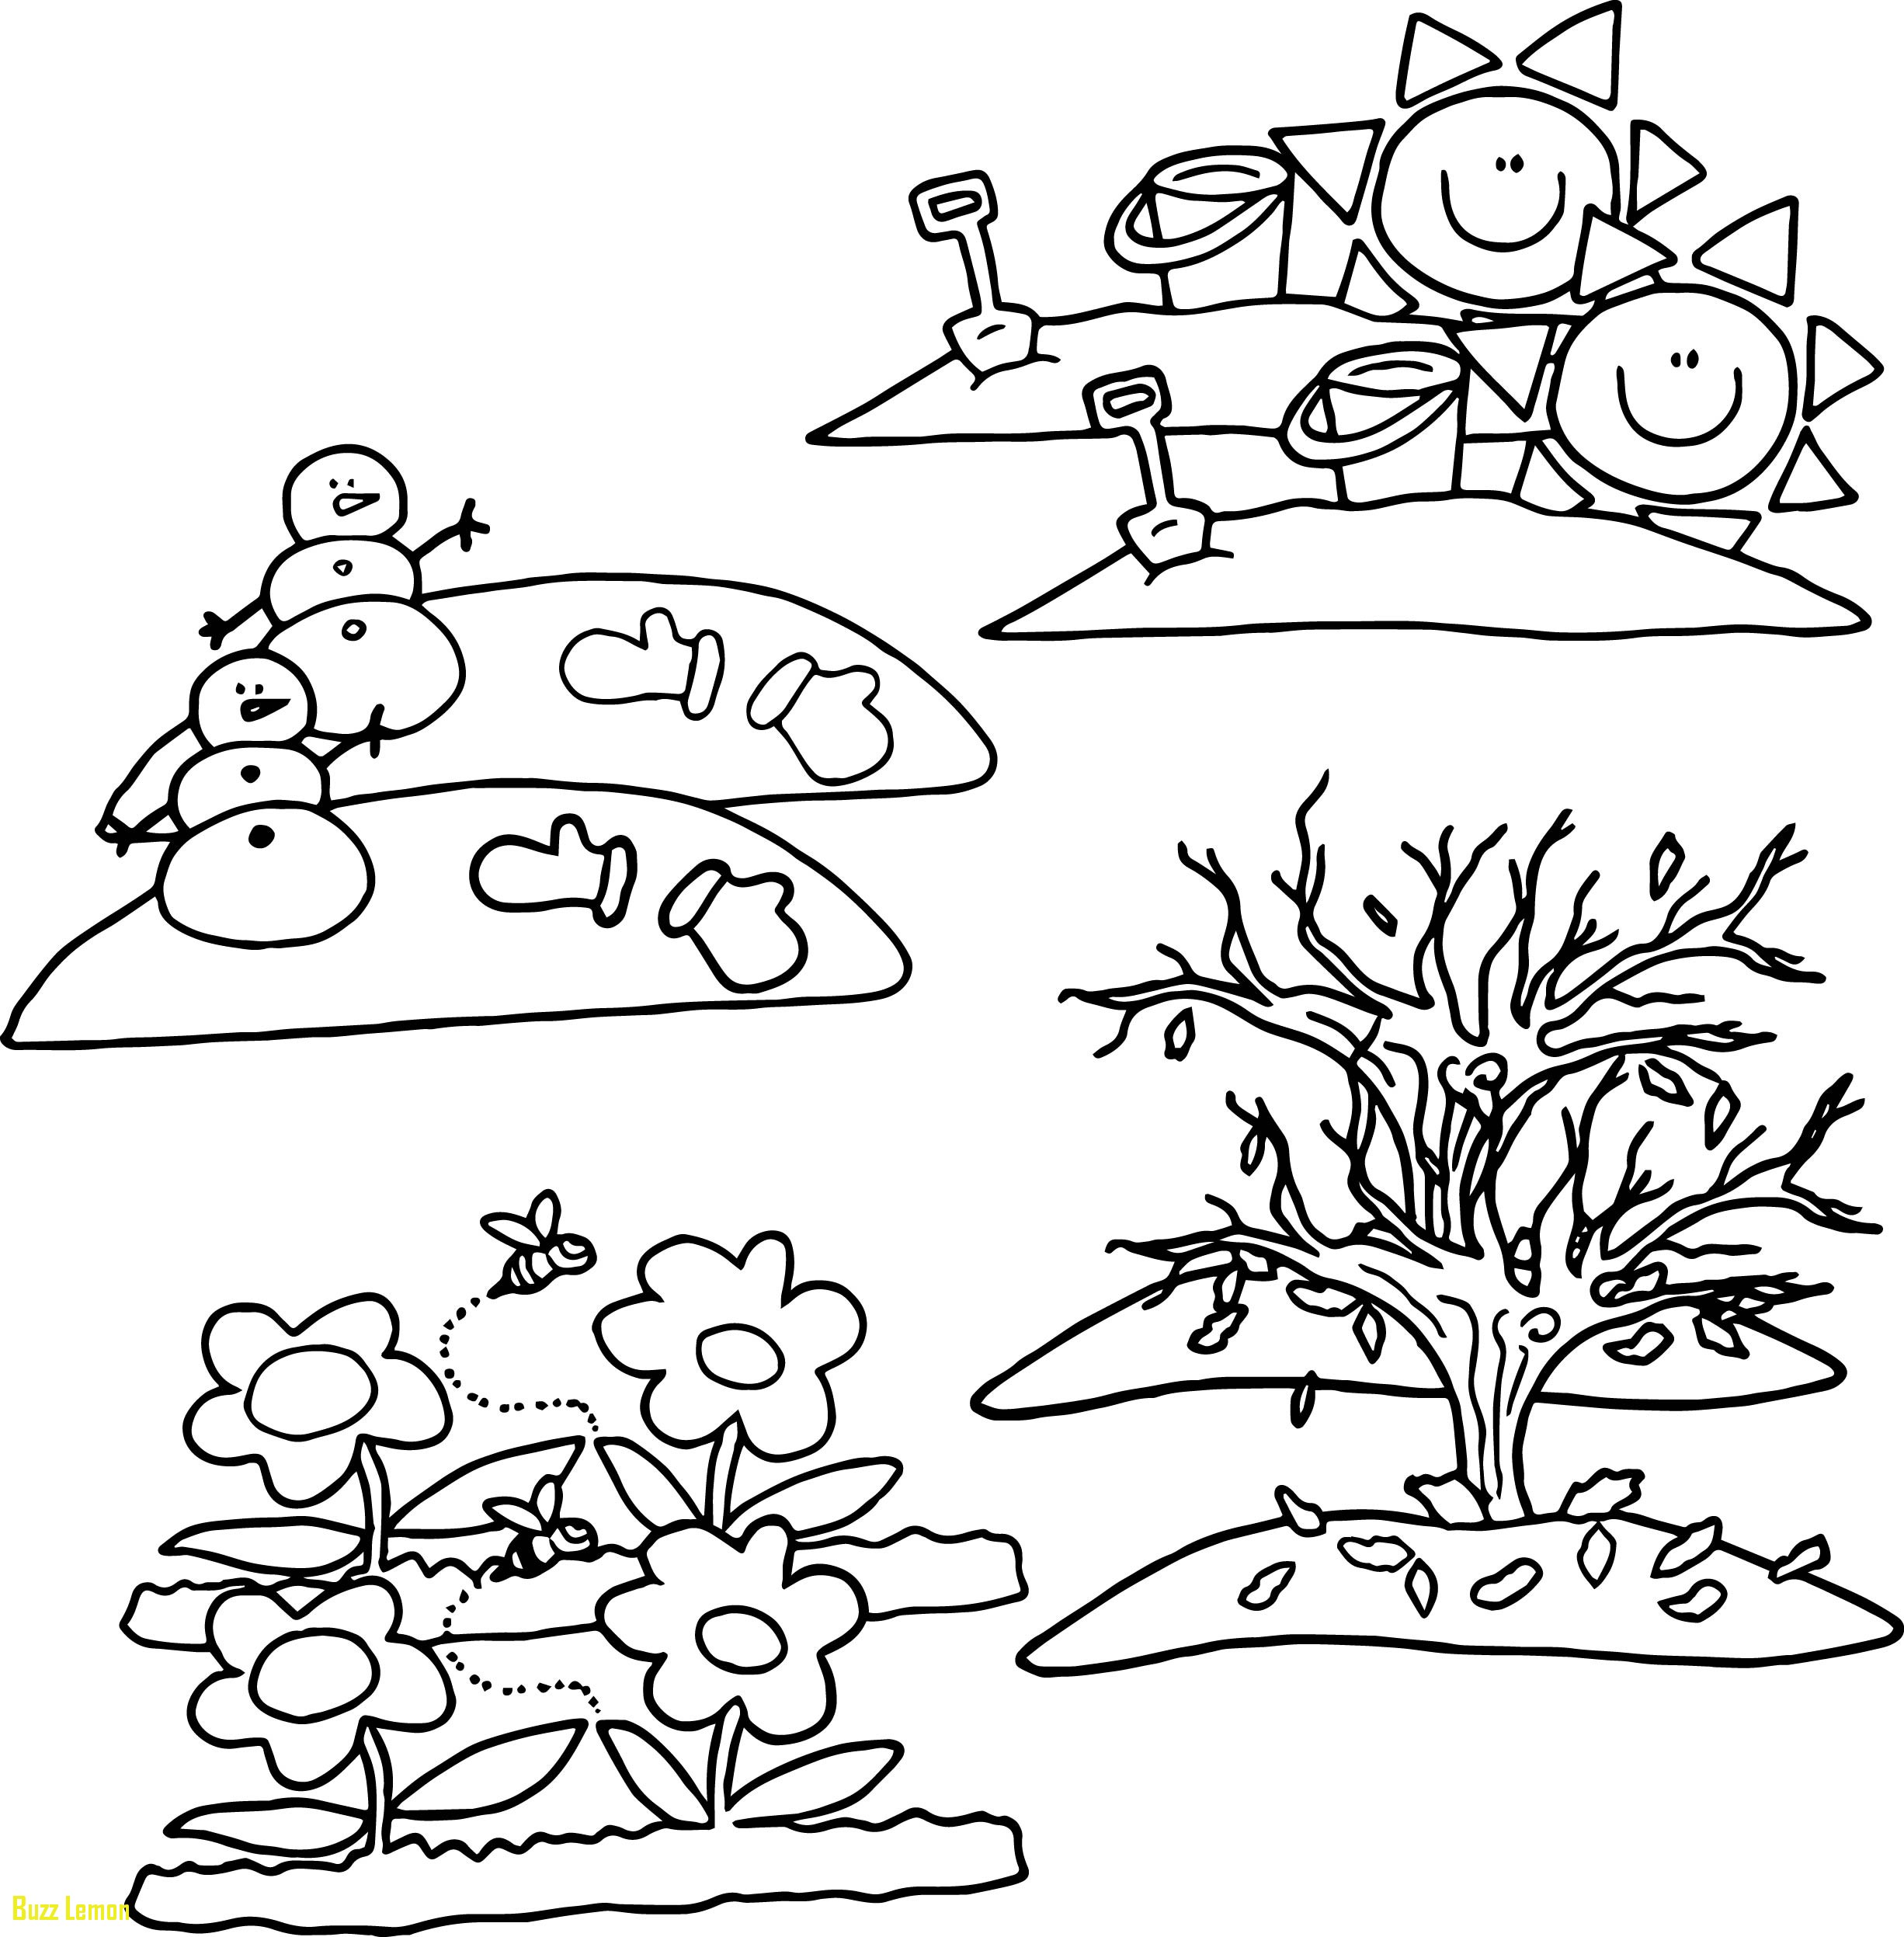 Four Seasons Coloring Page at GetDrawings Free download